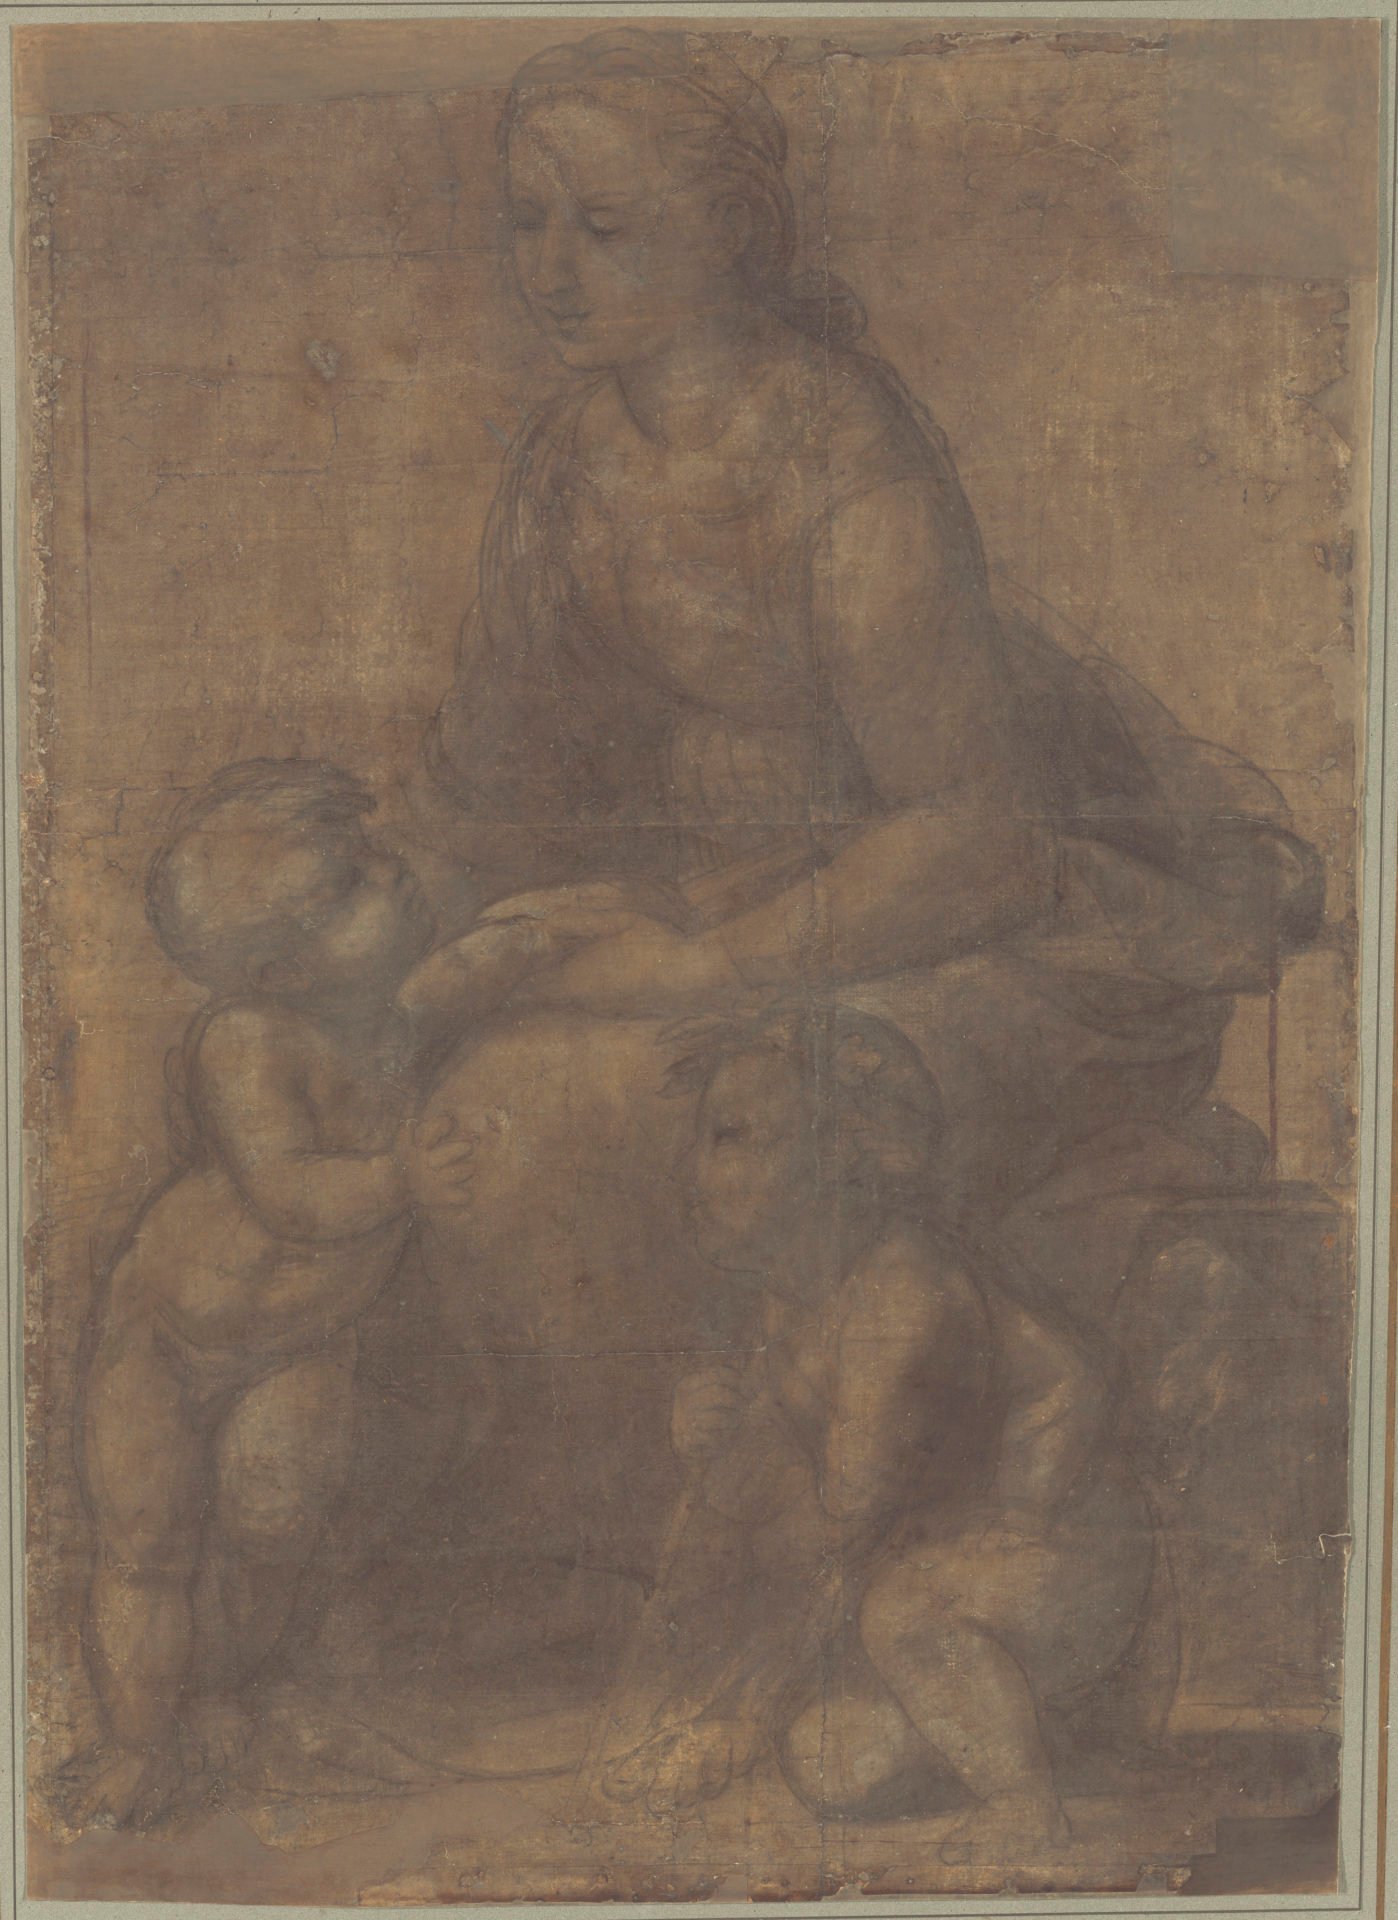 An Exhibition of Extraordinary Drawings by Raphael Highlights the